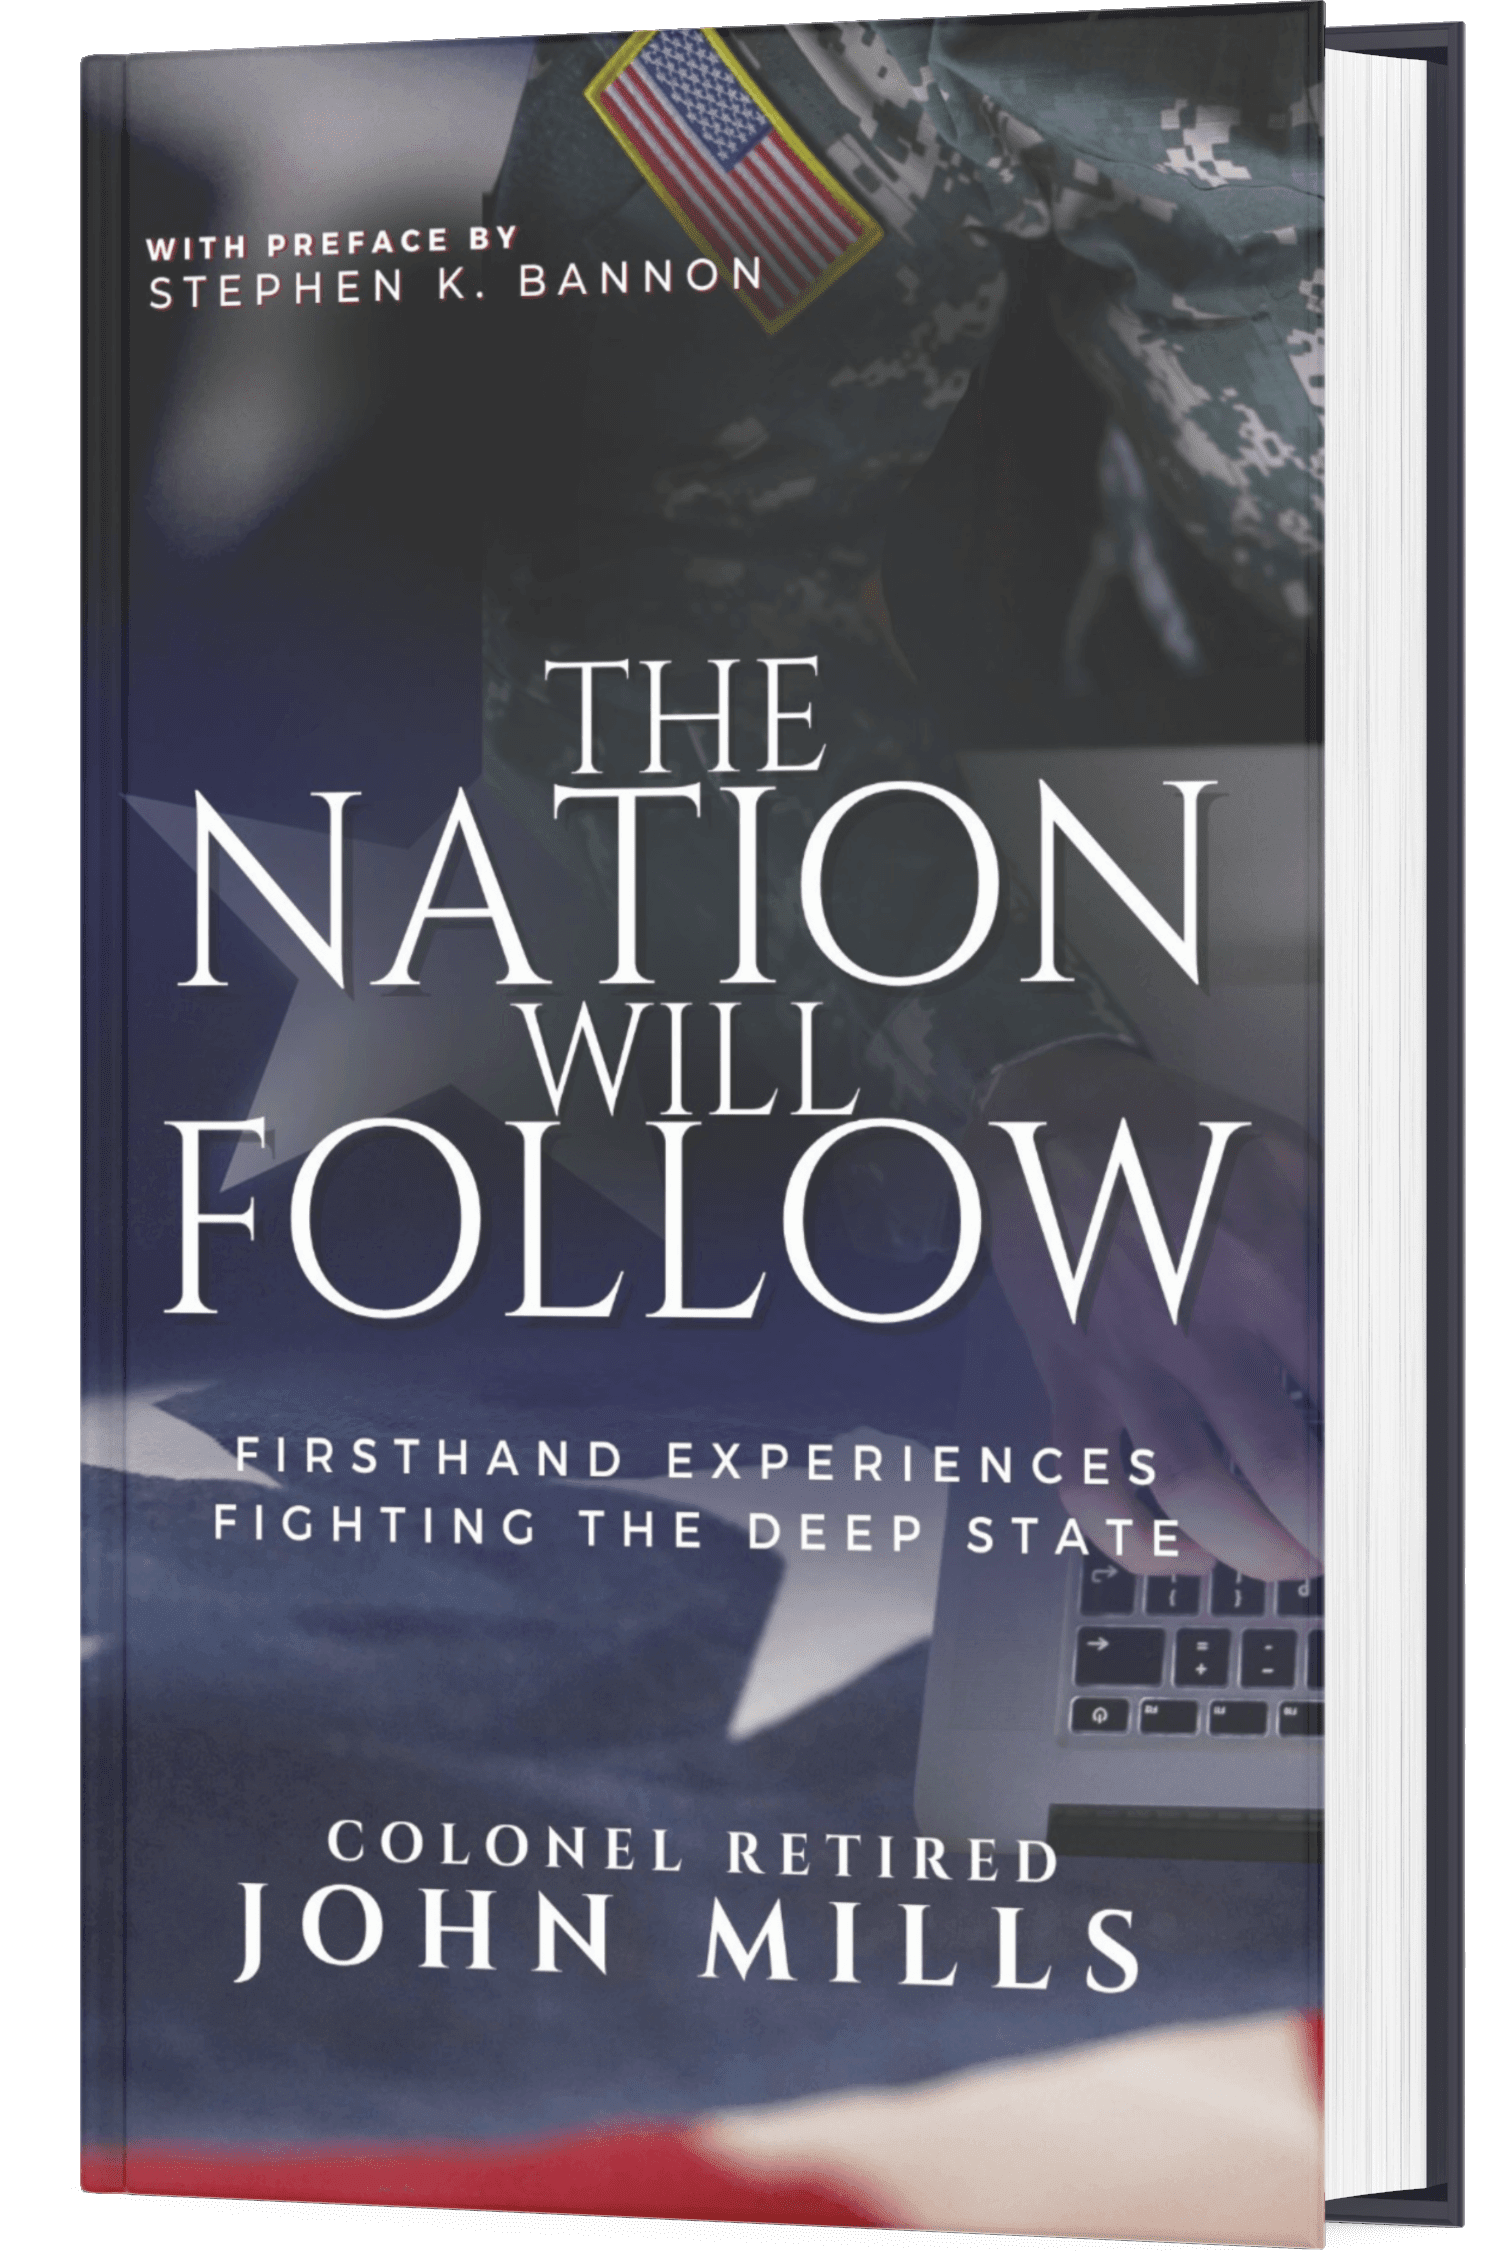 The book recounts Colonel Retired John Mills’ time inside the Deep State